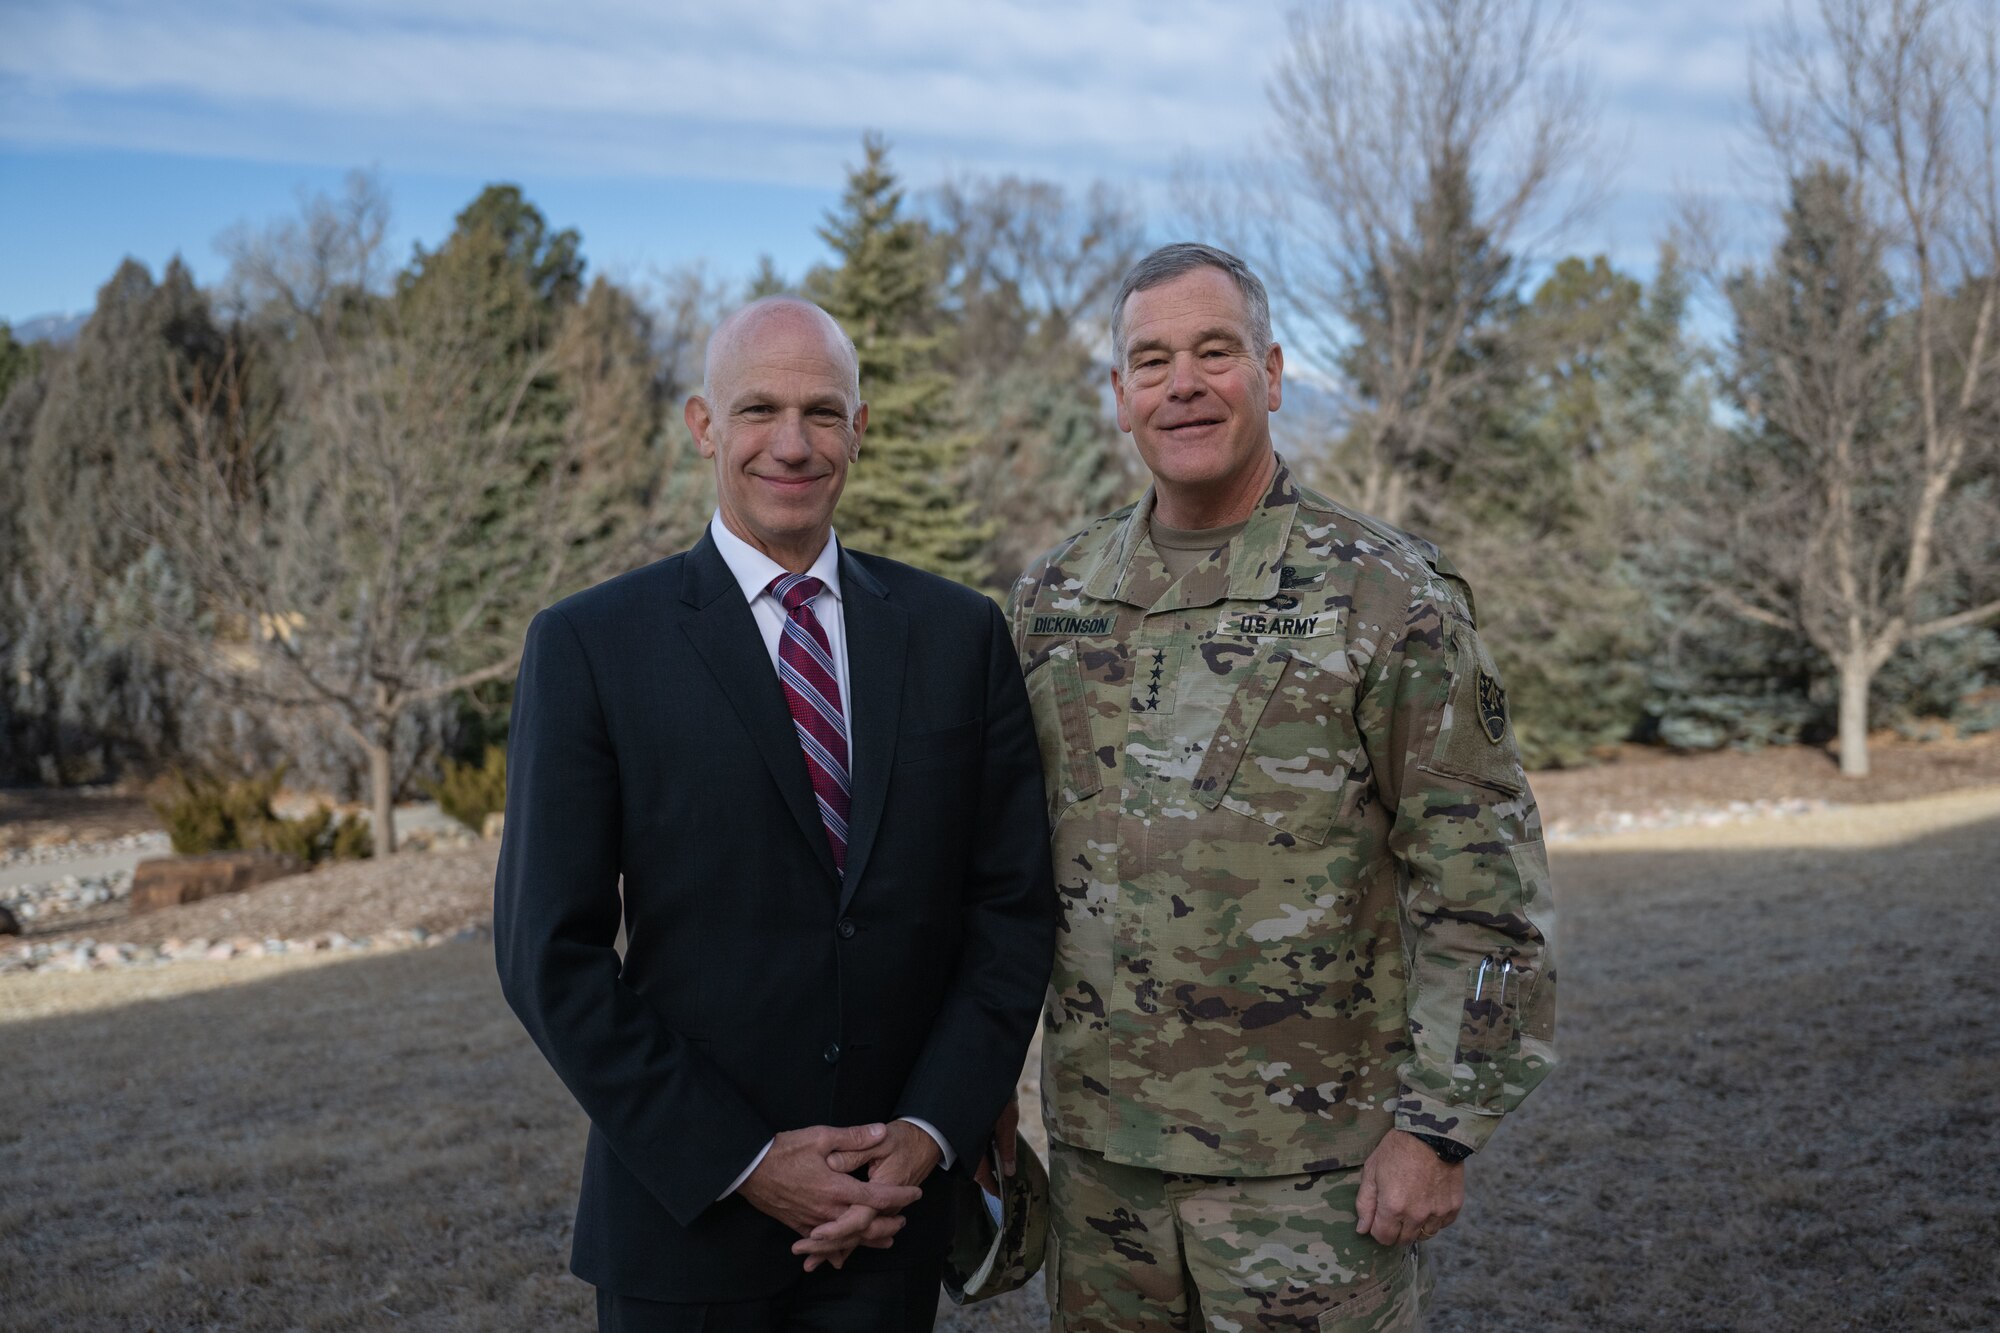 U.S. Army Gen. James Dickinson, U.S. Space Command commander, poses with Dr. James Baker, Office of Net Assessment director, on day one of USSPACECOM’s 2023 Spring Commander’s Conference at Peterson Space Force Base, Colo., March 14, 2023. Dr. Baker spoke to more than 70 senior leaders during the three-day conference concerning the current strategic environment and the implication of space operations and warfare in the space domain. (USSPACECOM Photo by John Ayre)